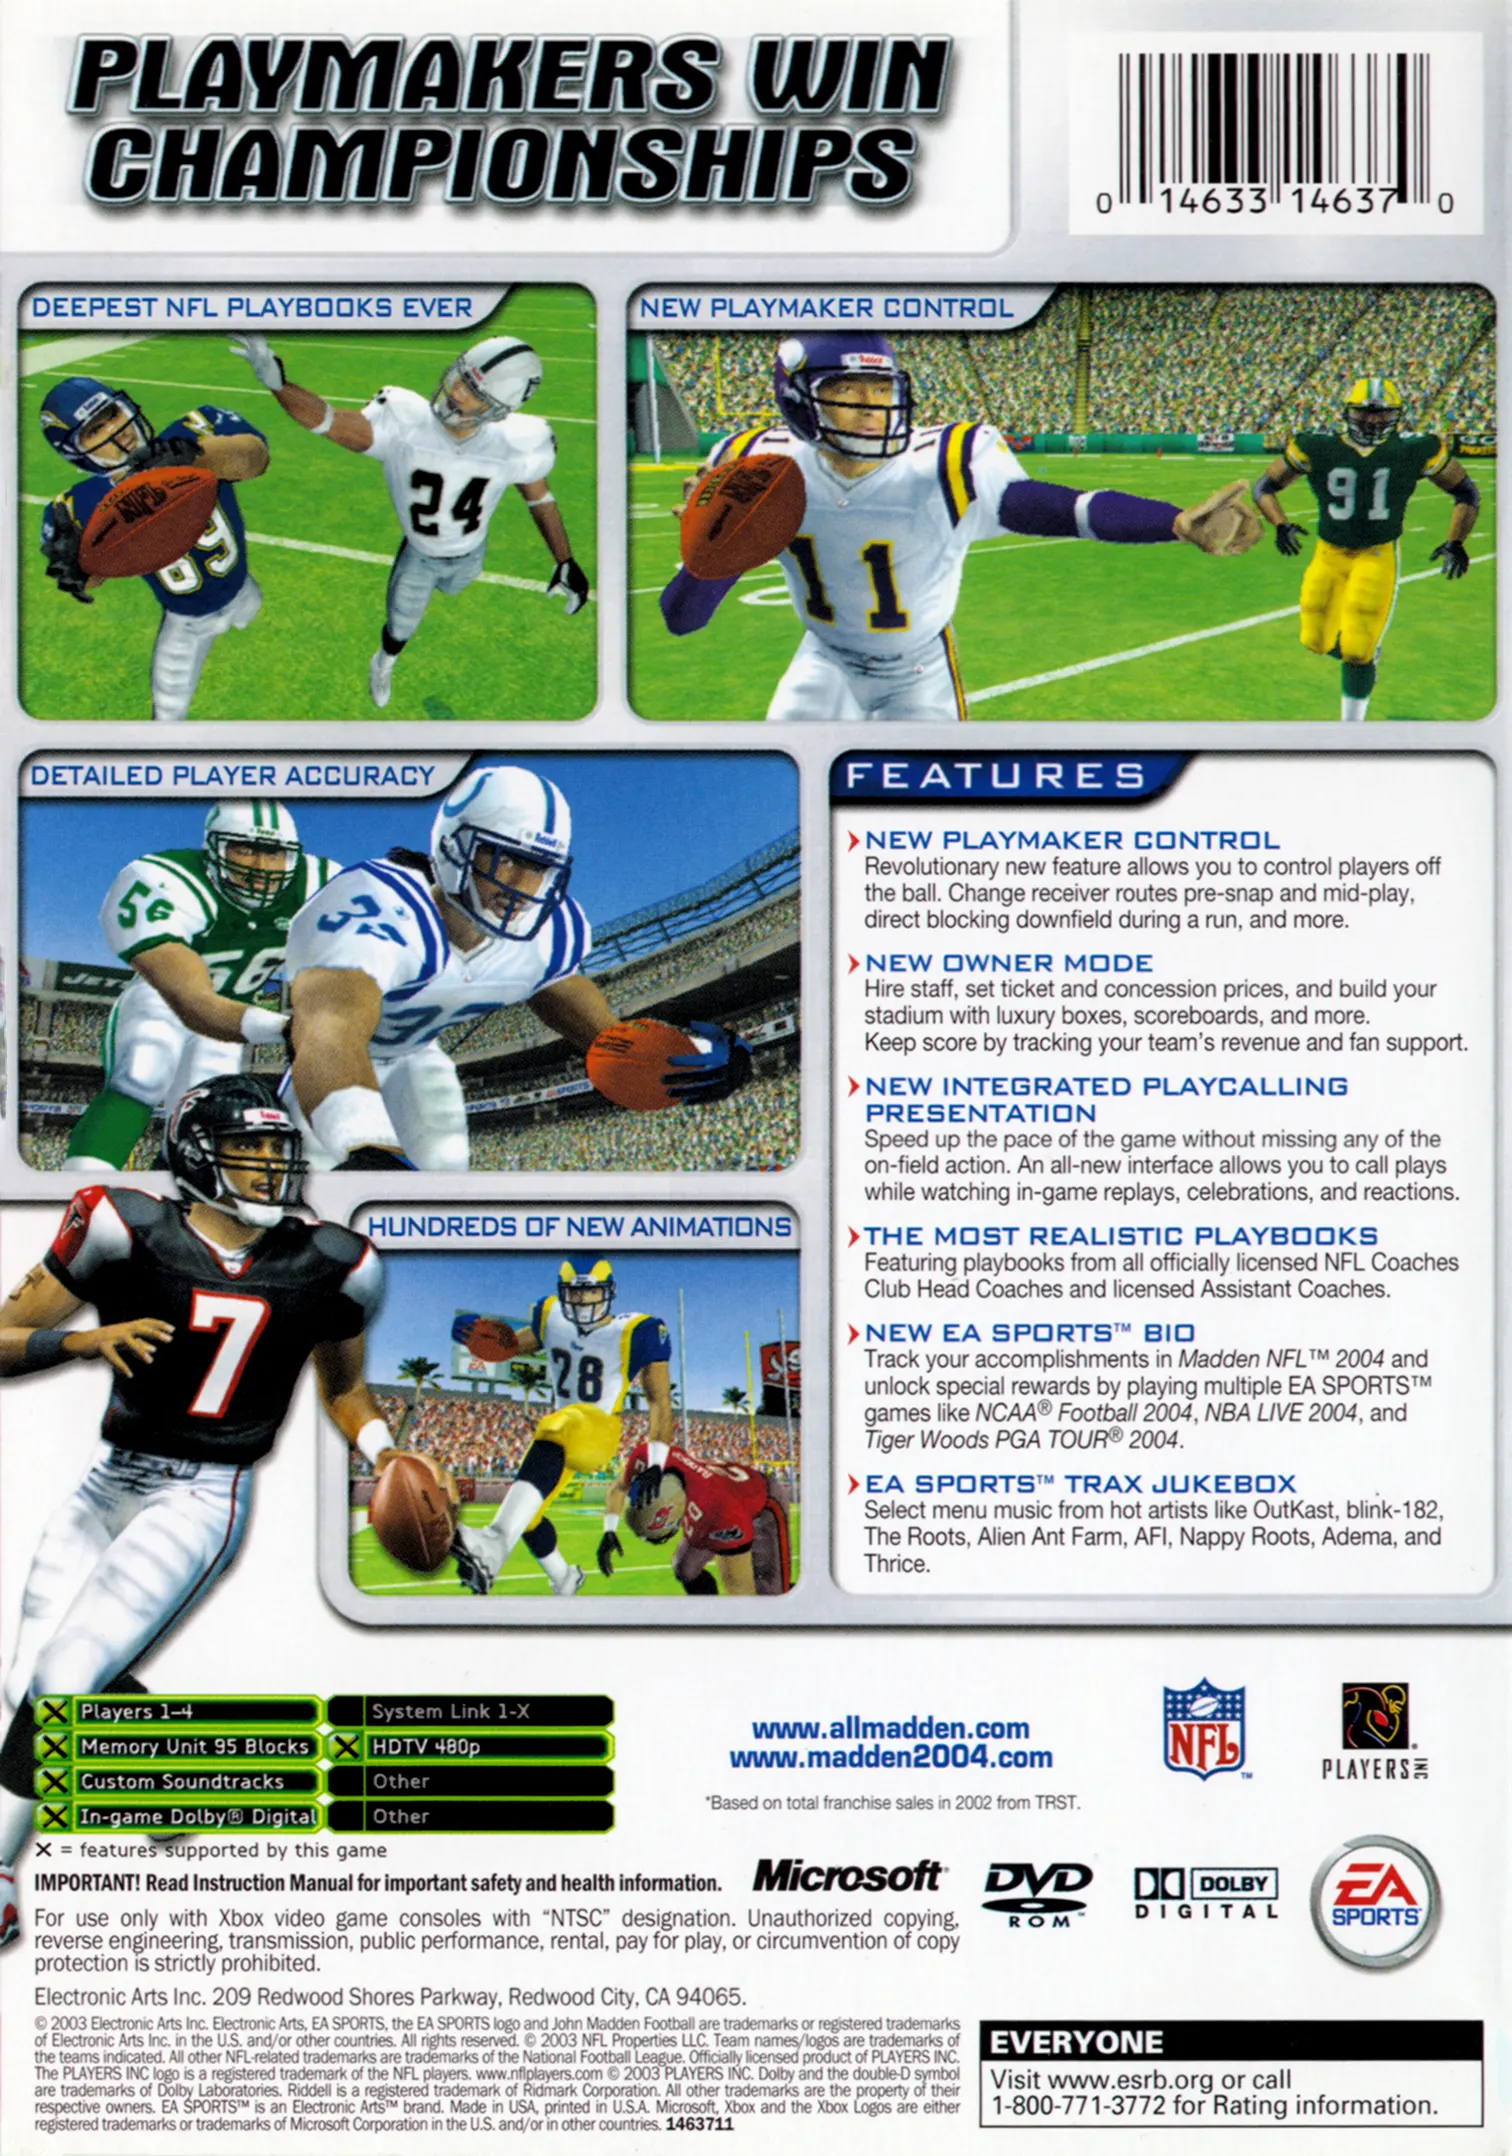 Madden NFL 2004 Game Box Back. Playmakers Win Championships.